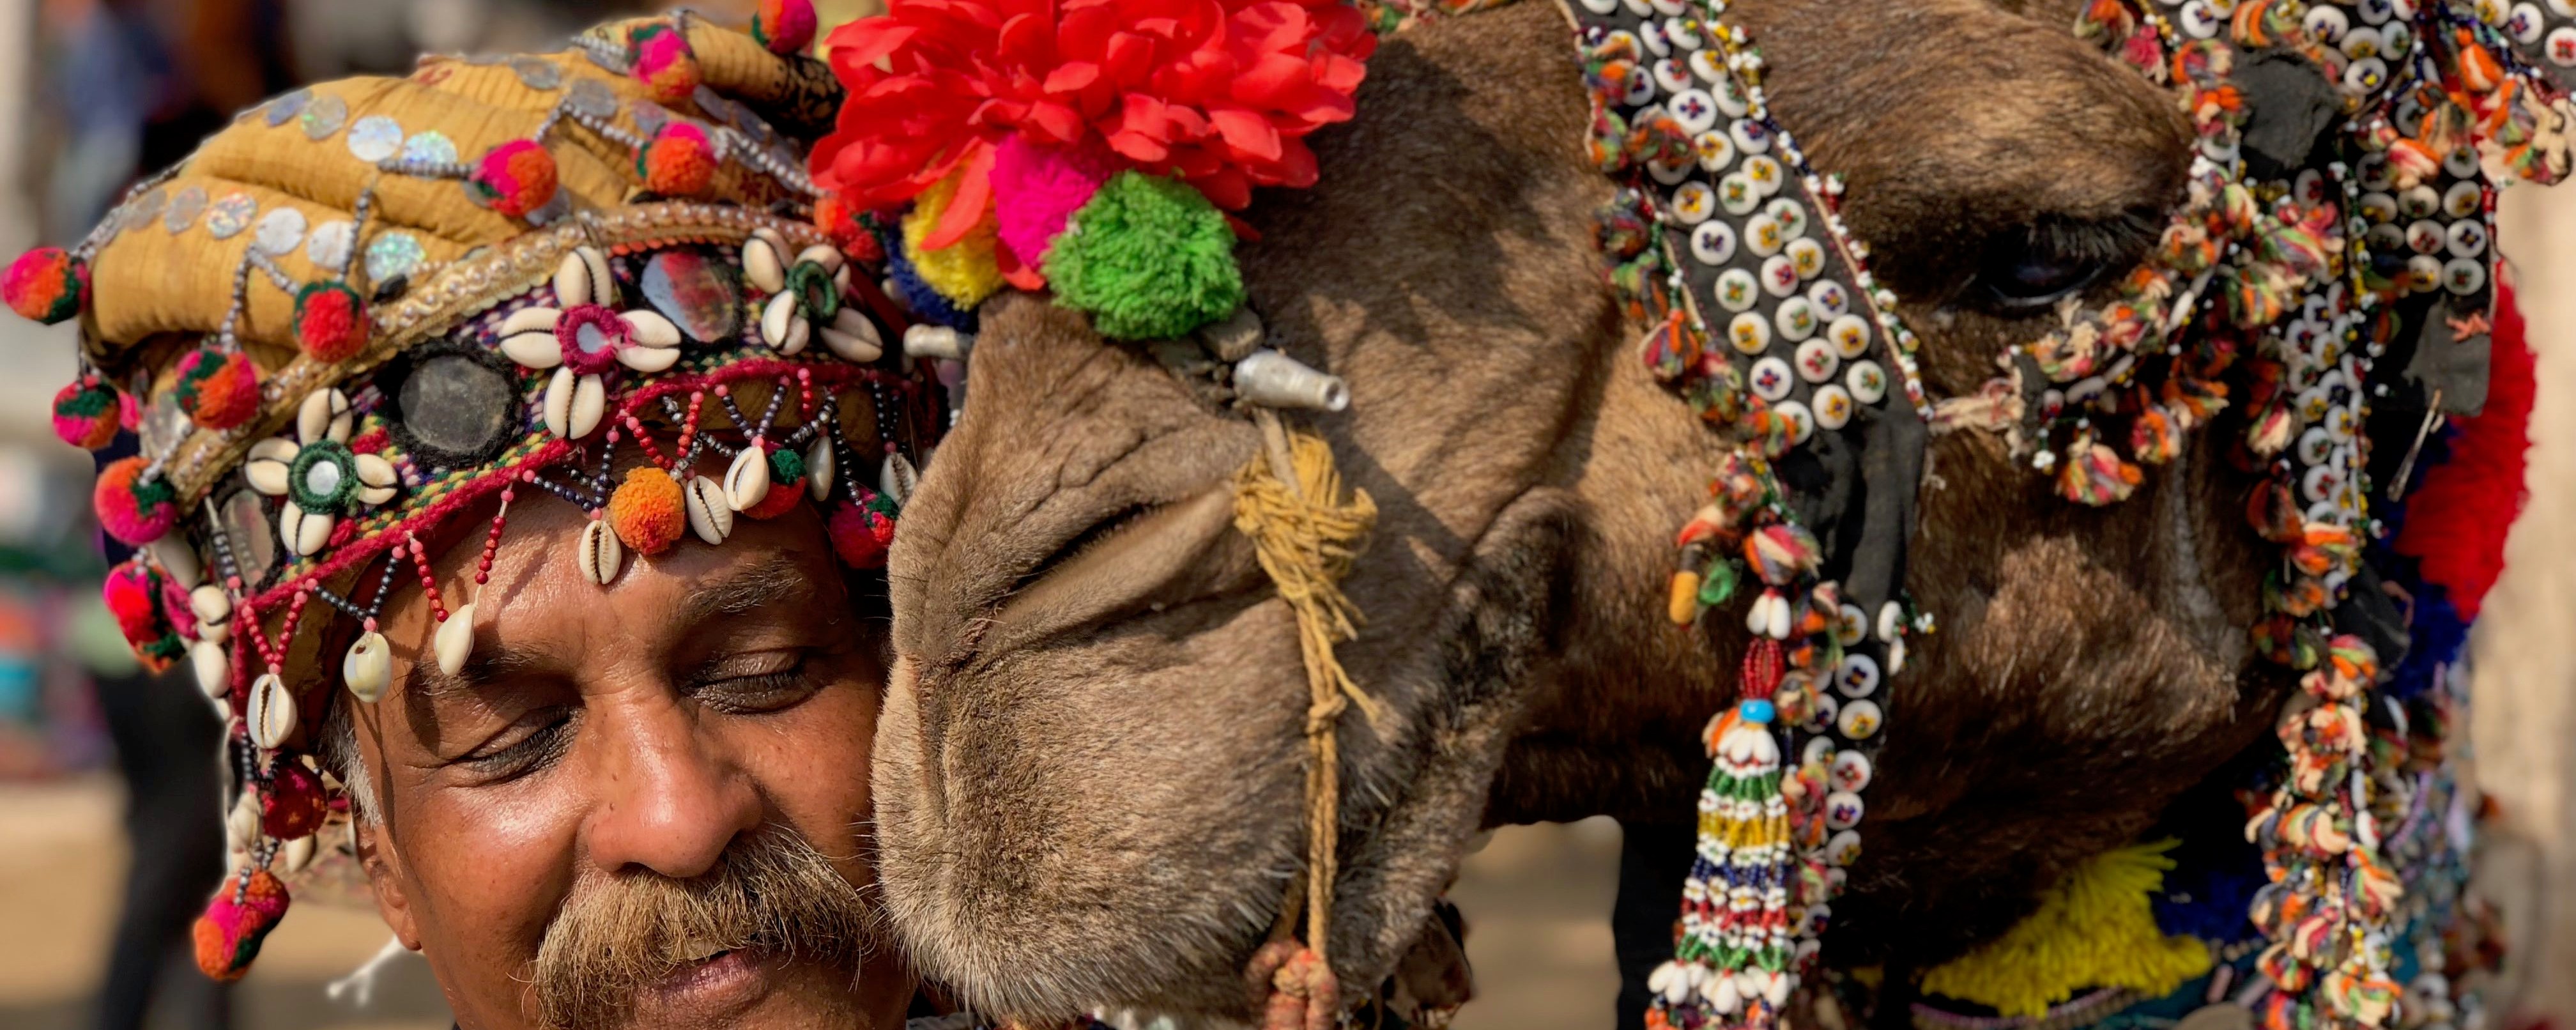 I Went To A Massive Camel Beauty Pageant In The Deserts Of India